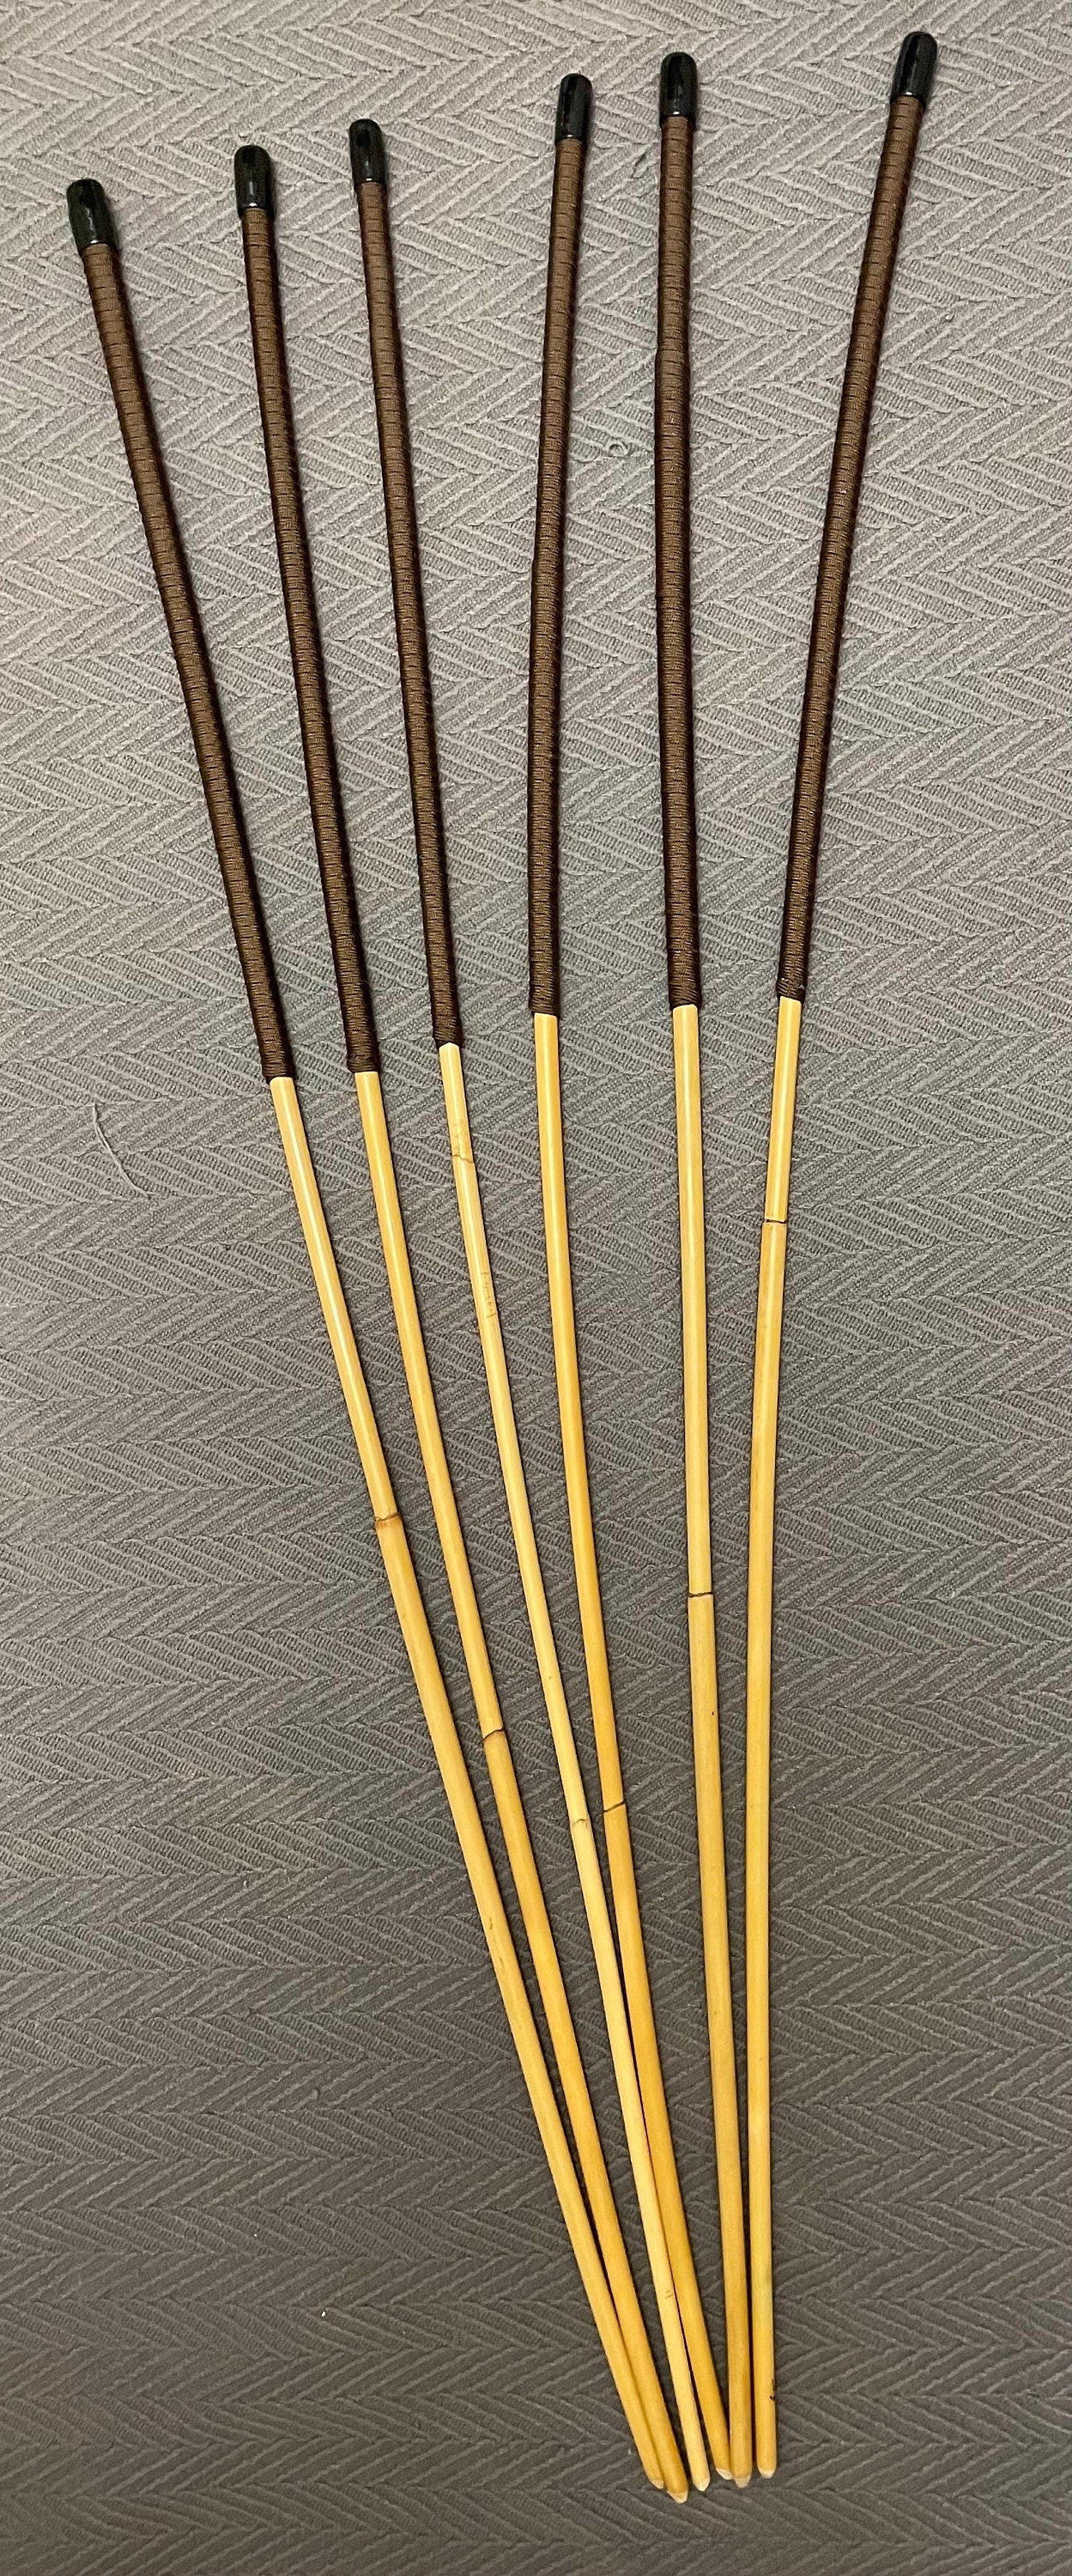 The Stinger Six Set of 6 Whippy Thin Swishy Dragon Canes  with Brown Paracord Handles - 95 cms Length